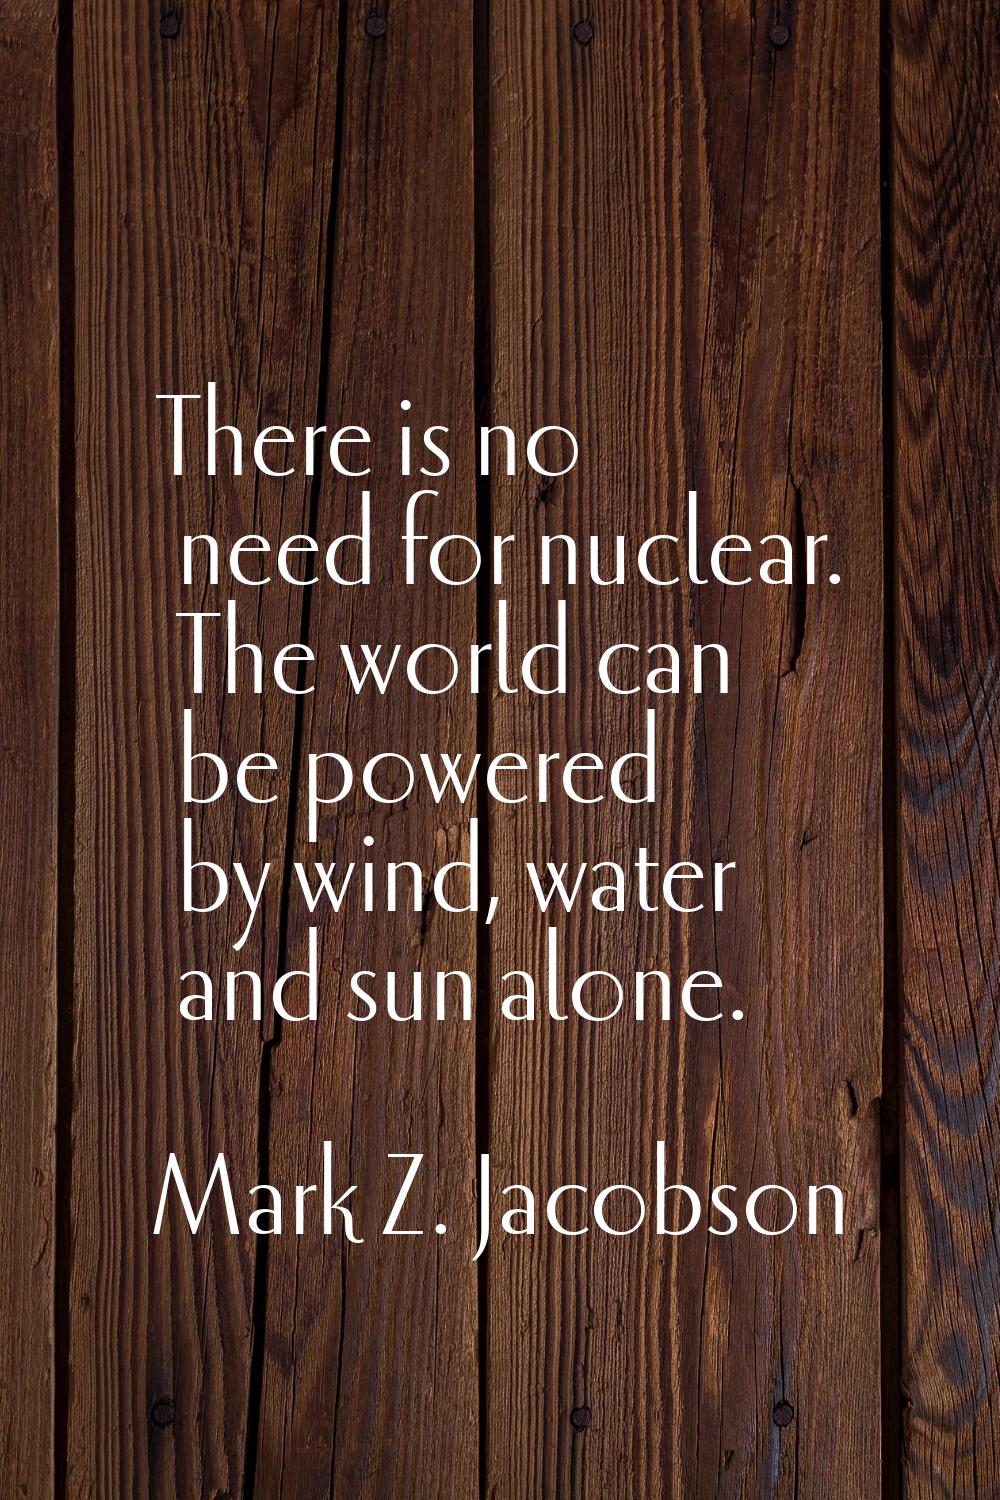 There is no need for nuclear. The world can be powered by wind, water and sun alone.